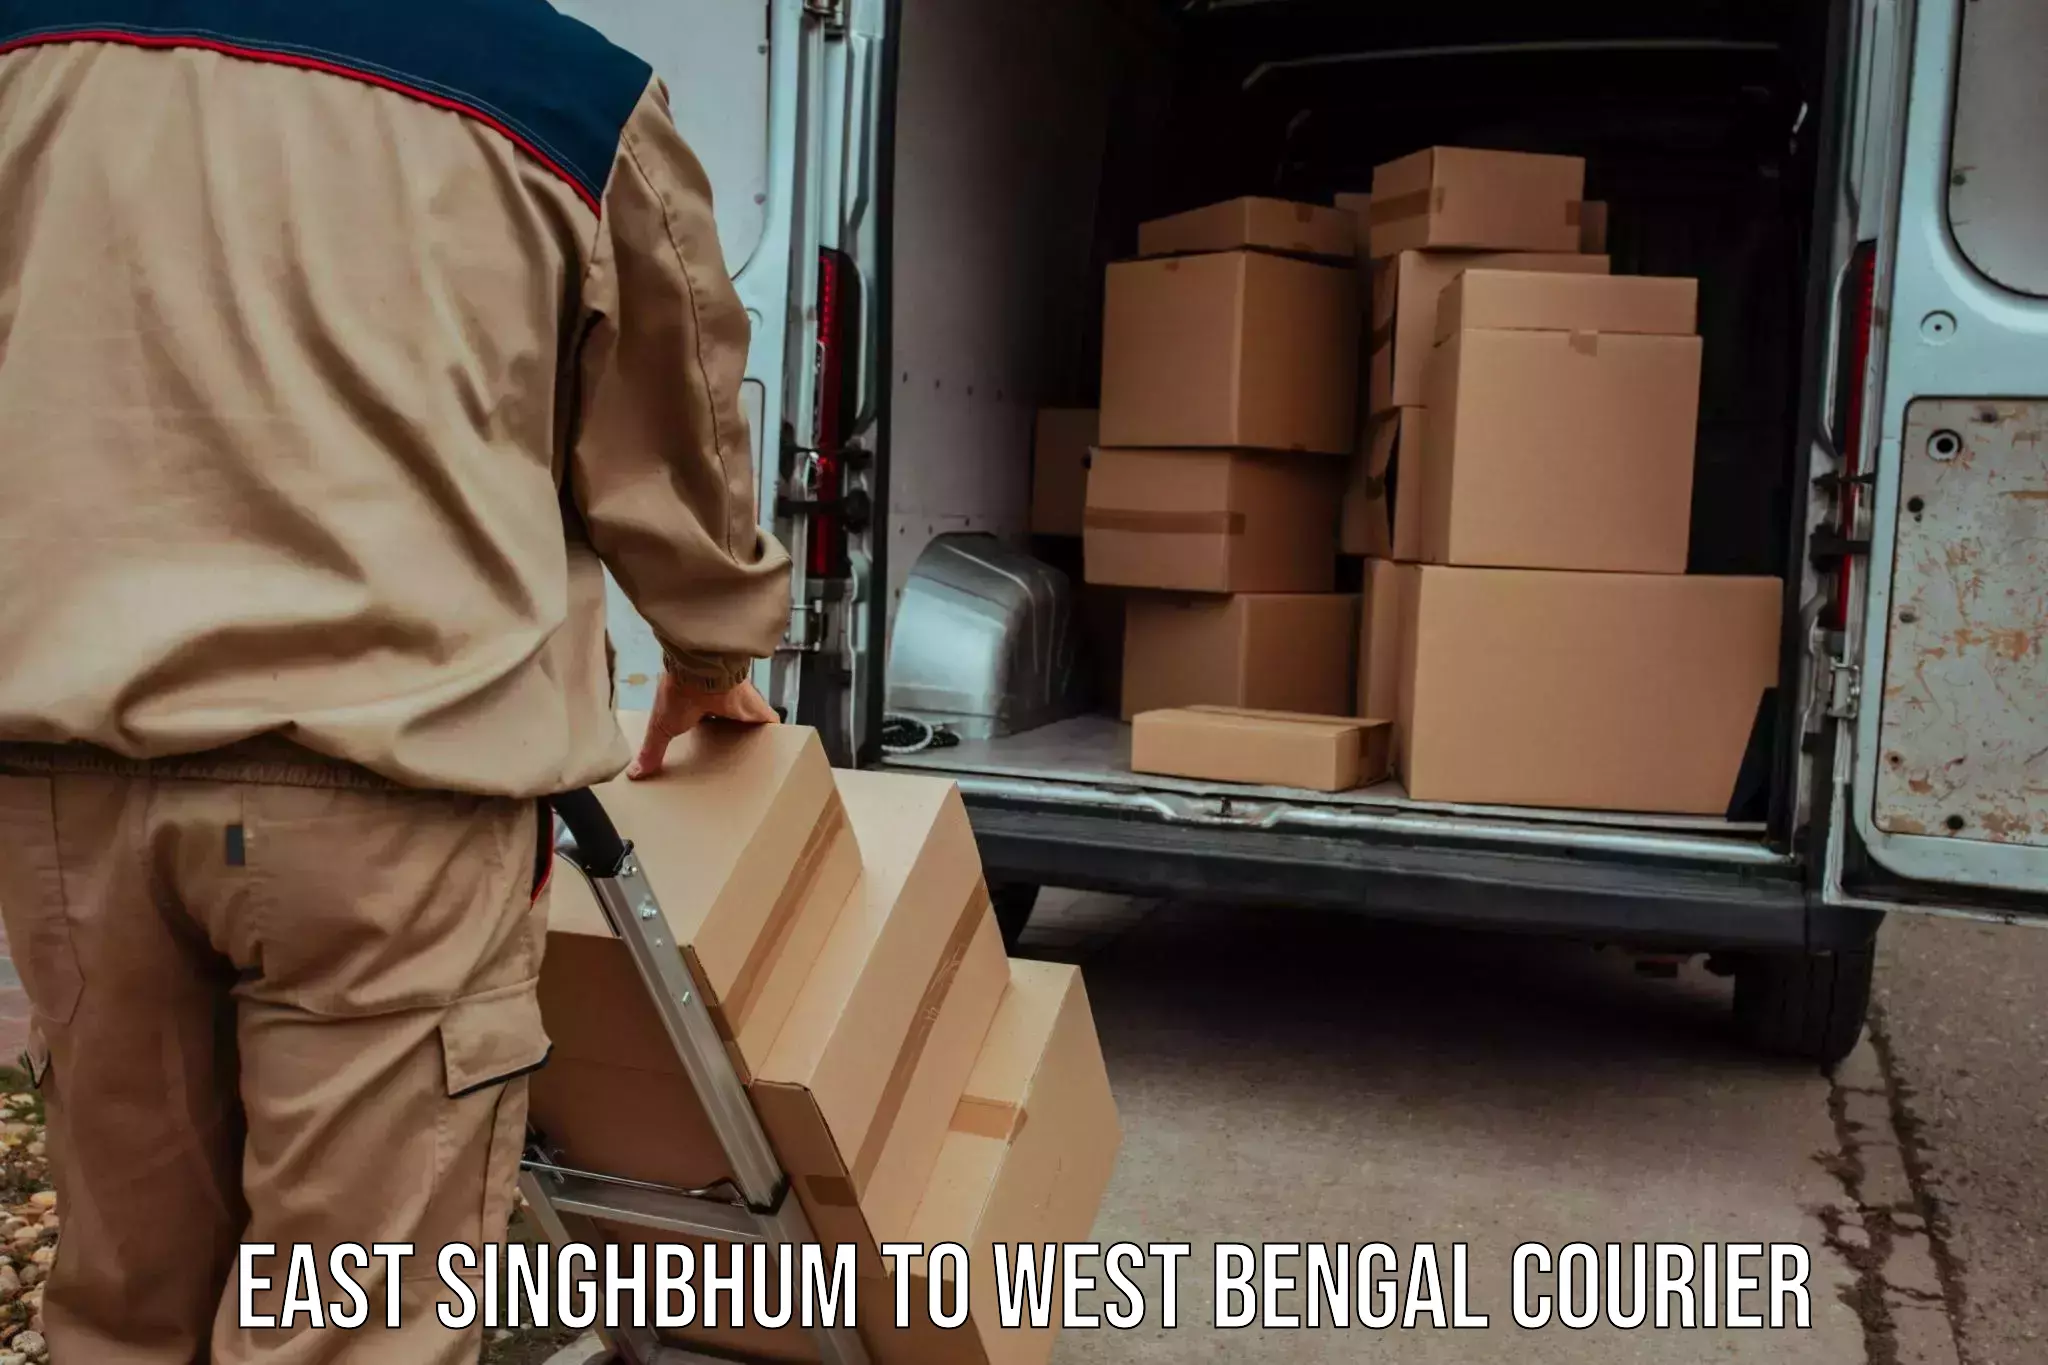 Speedy delivery service East Singhbhum to West Bengal